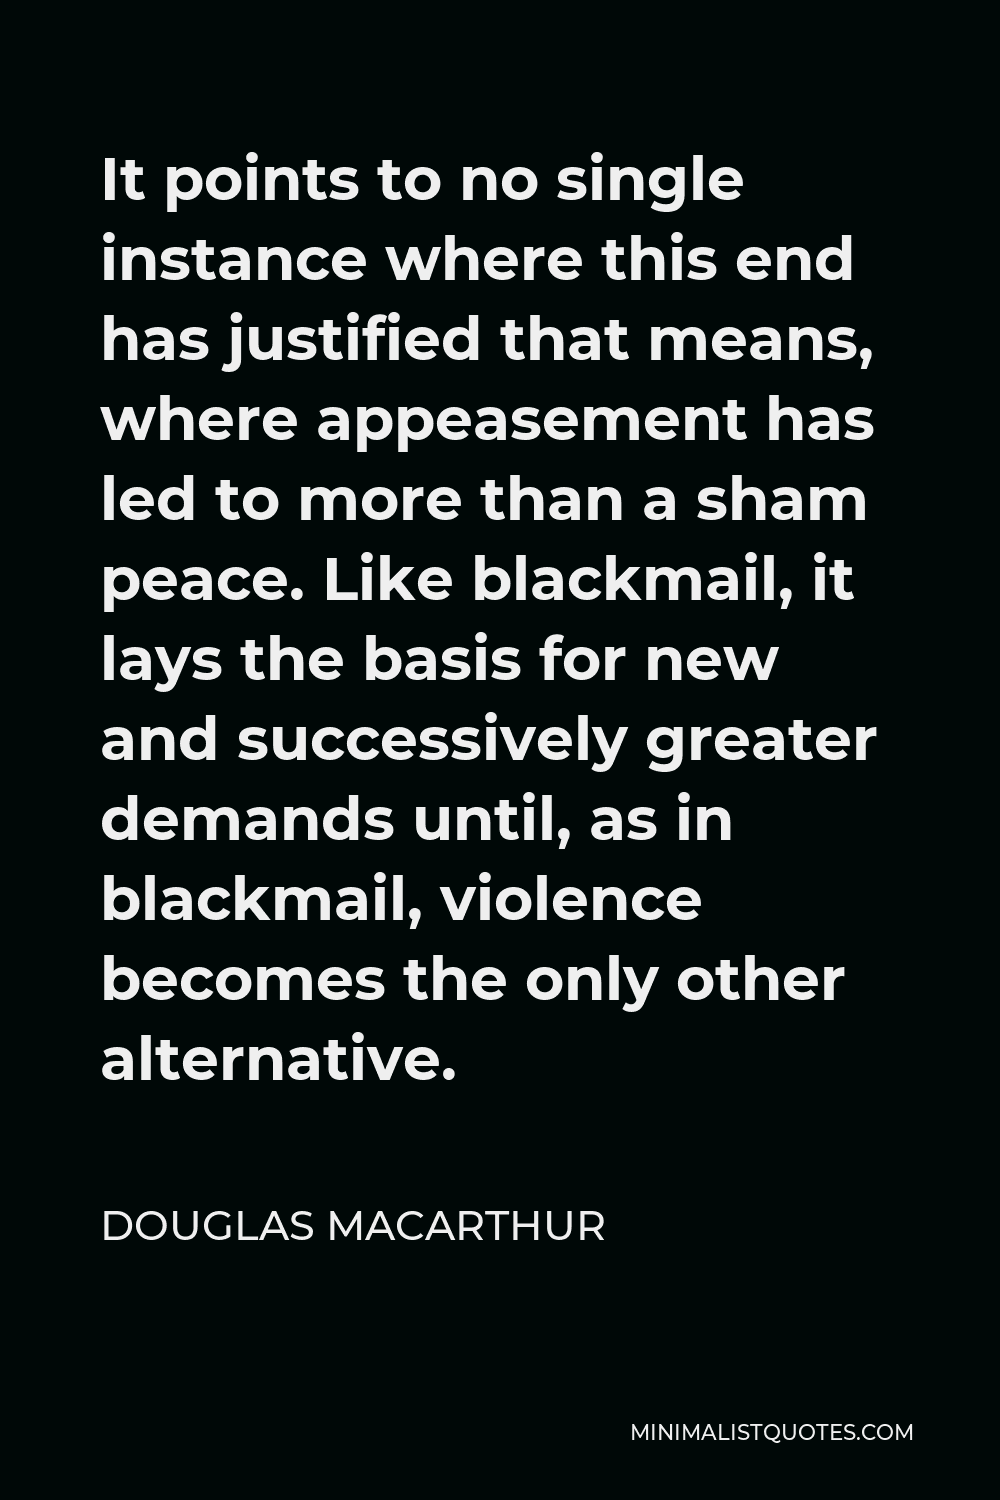 Douglas MacArthur Quote - It points to no single instance where this end has justified that means, where appeasement has led to more than a sham peace. Like blackmail, it lays the basis for new and successively greater demands until, as in blackmail, violence becomes the only other alternative.